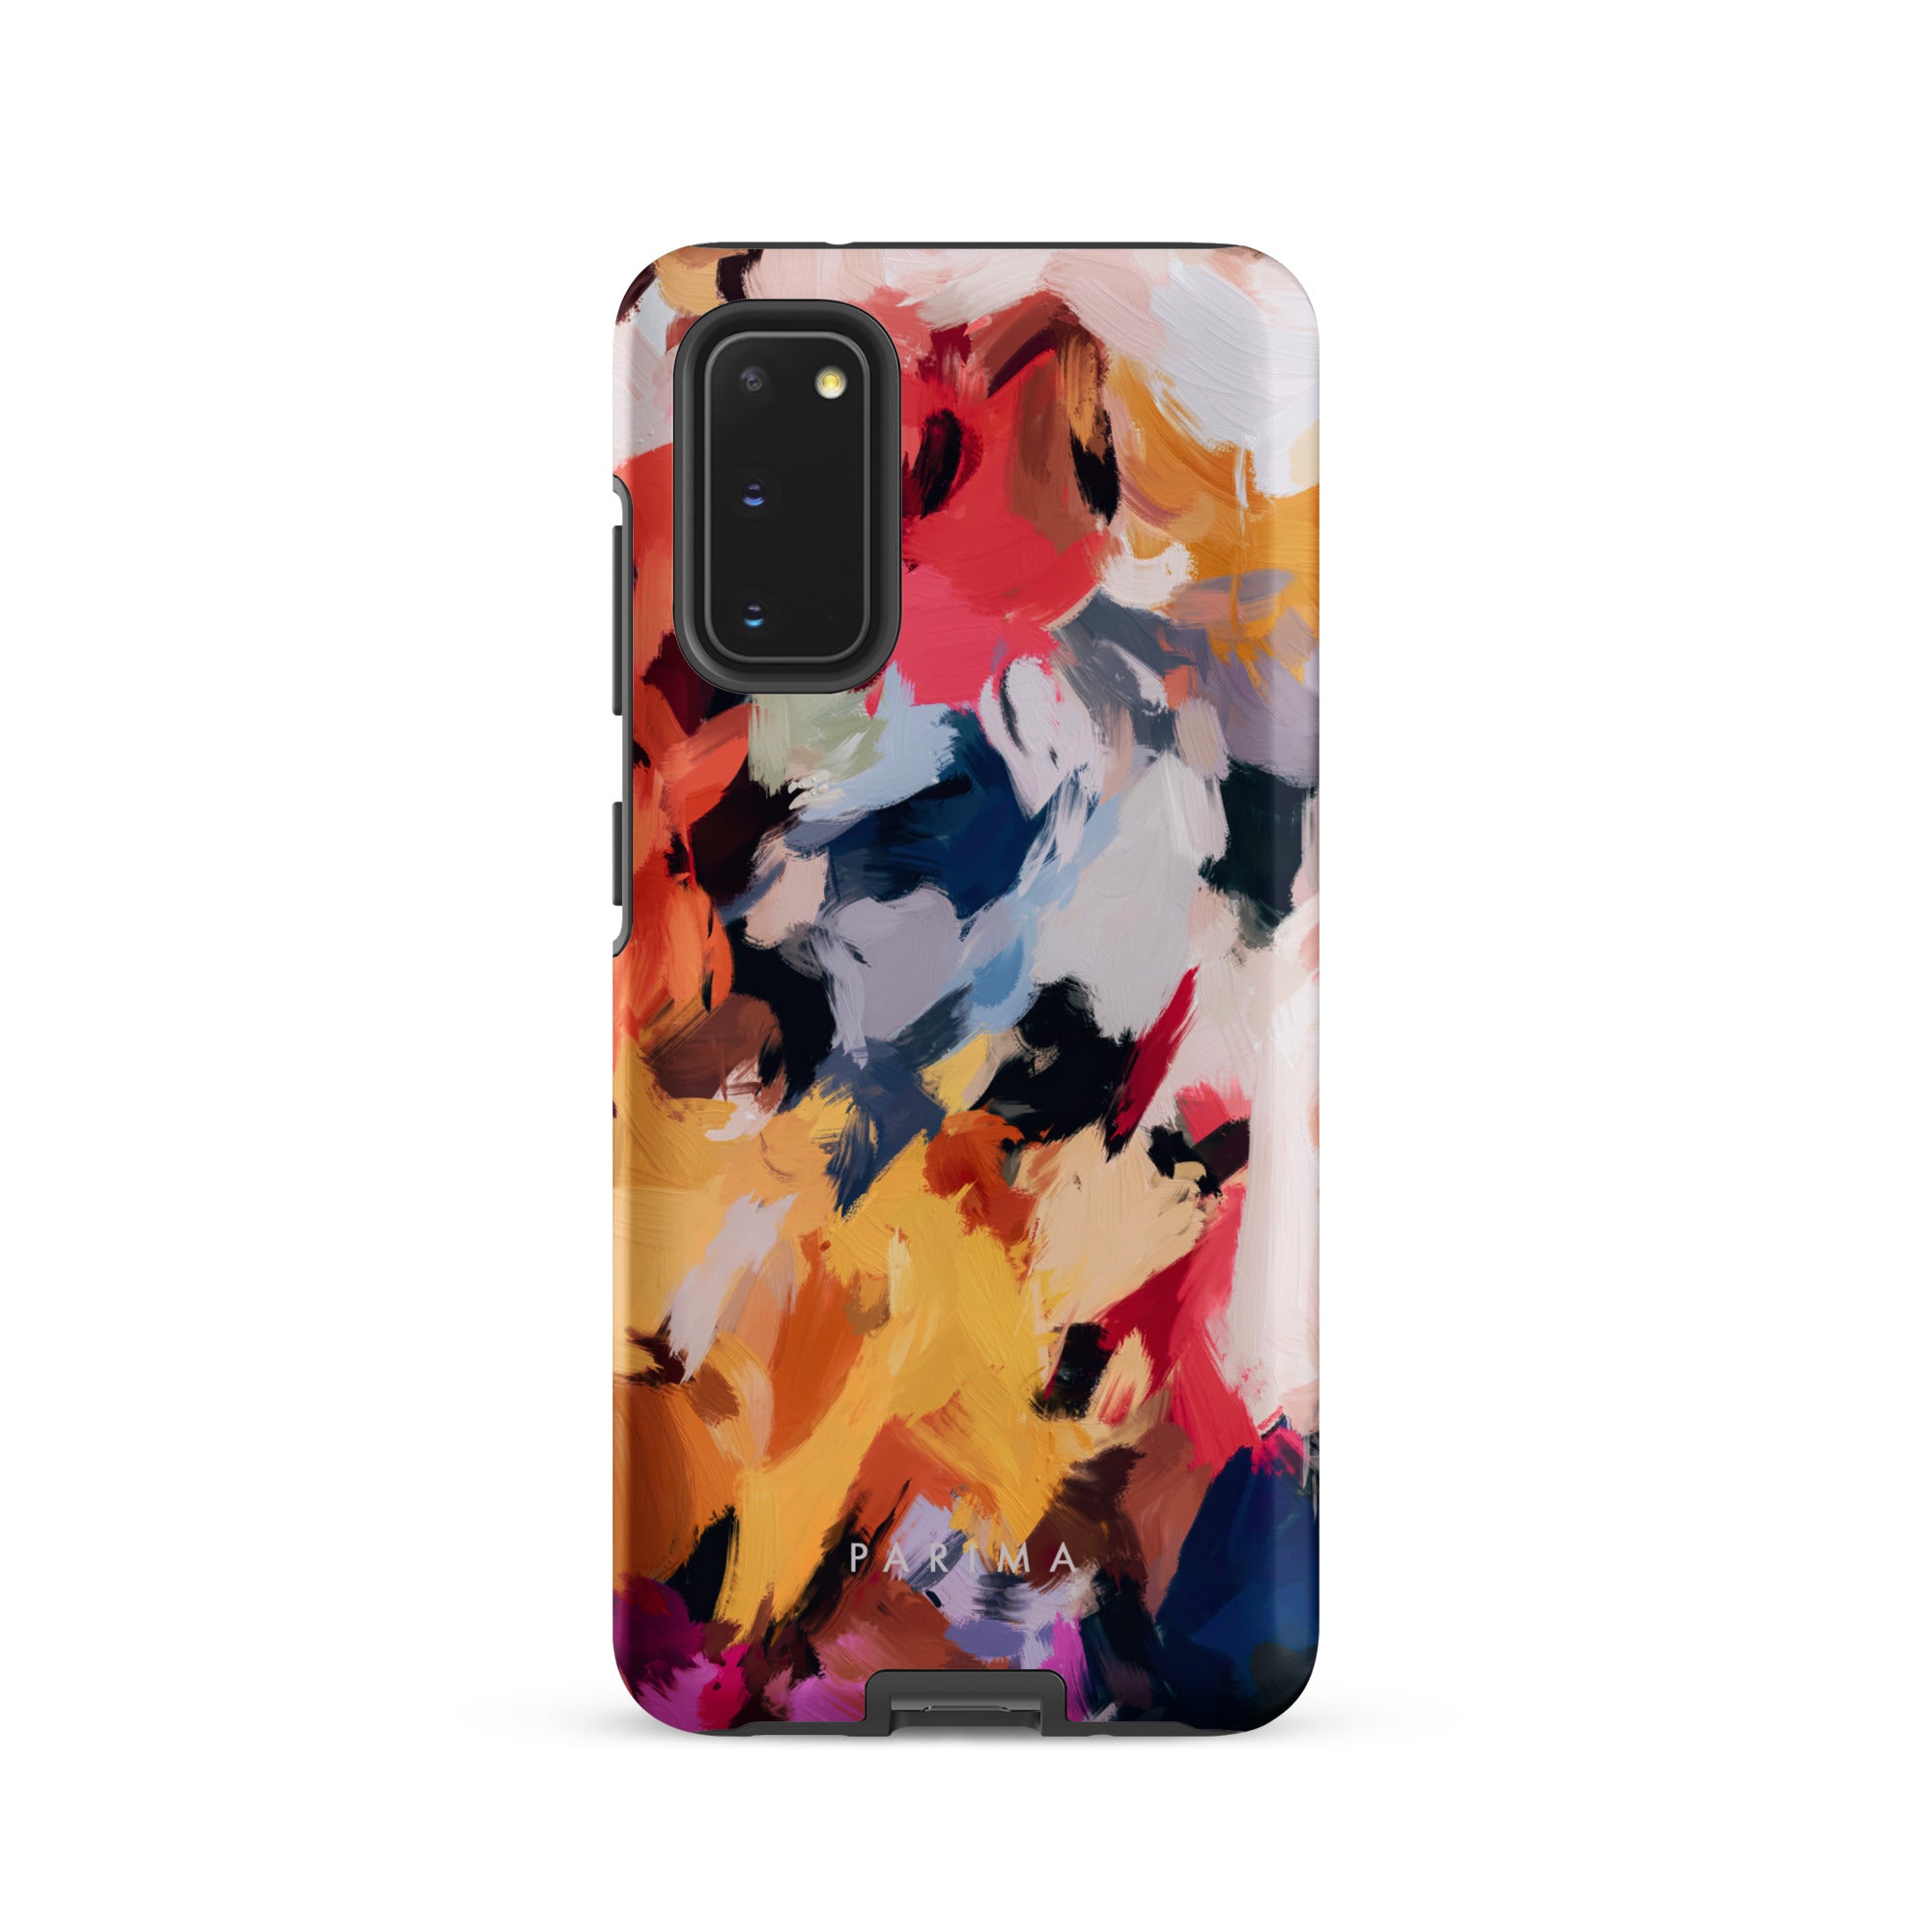 Wilde, blue and yellow multicolor abstract art on Samsung Galaxy S20 tough case by Parima Studio